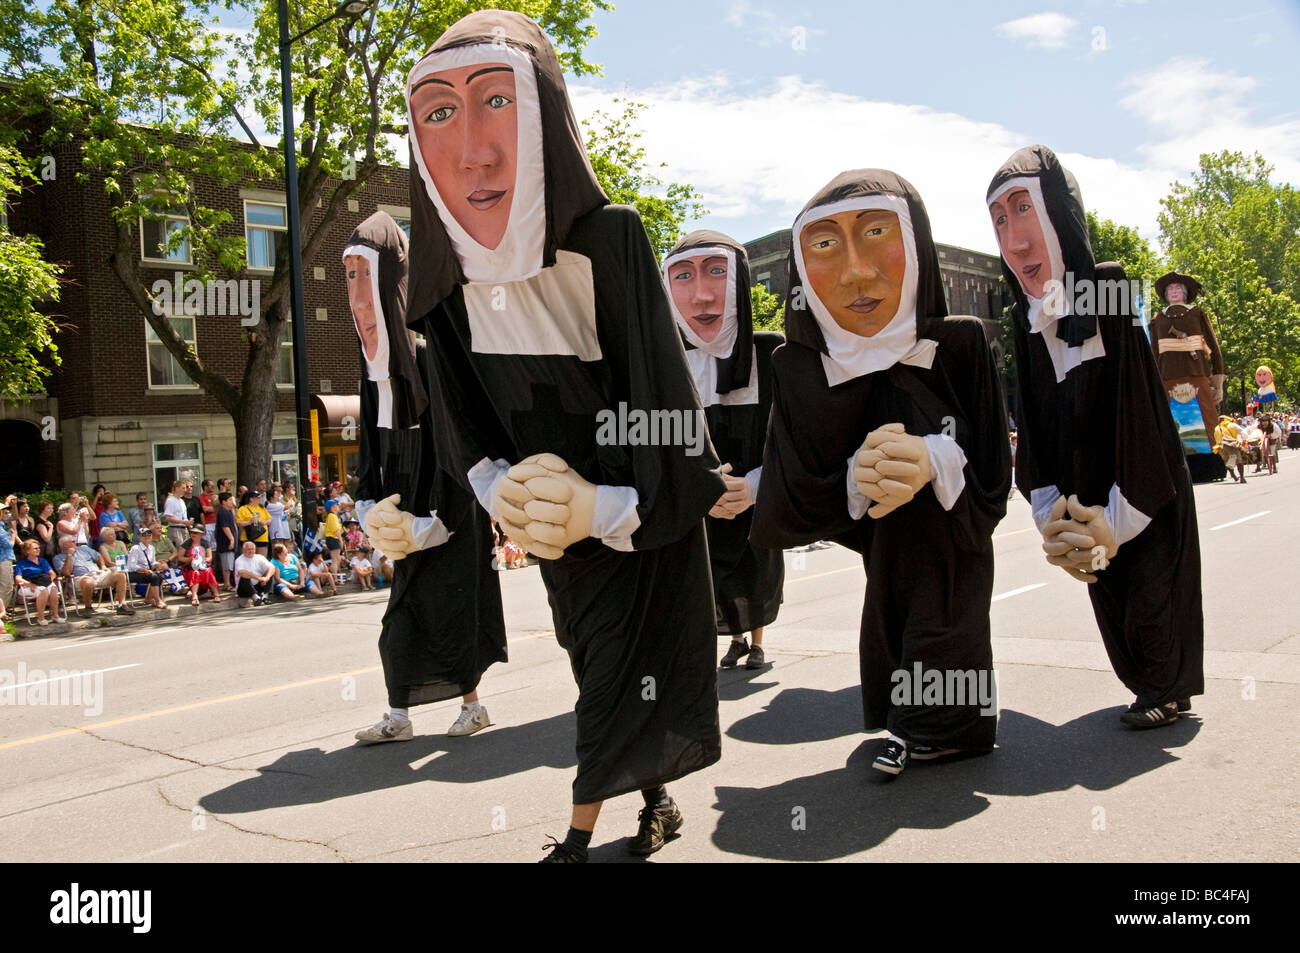 Giant figurines at the Saint jean baptiste parade Montreal Quebec Canada Stock Photo